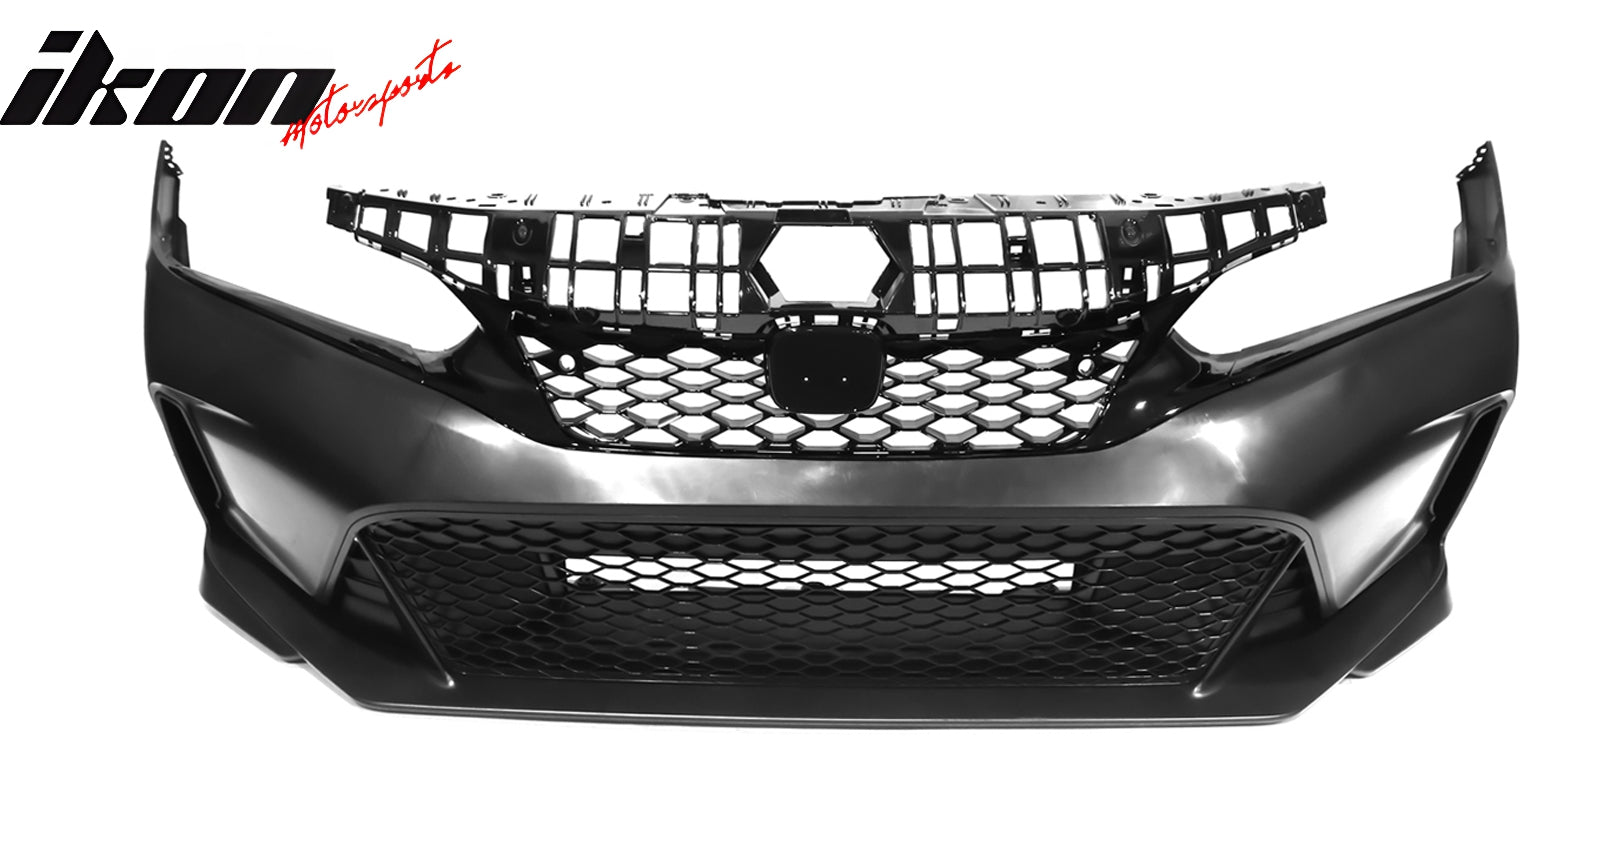 Fits 22-24 Civic Hatchback &Si Type R Style Front Bumper Cover PP + Upper Grille